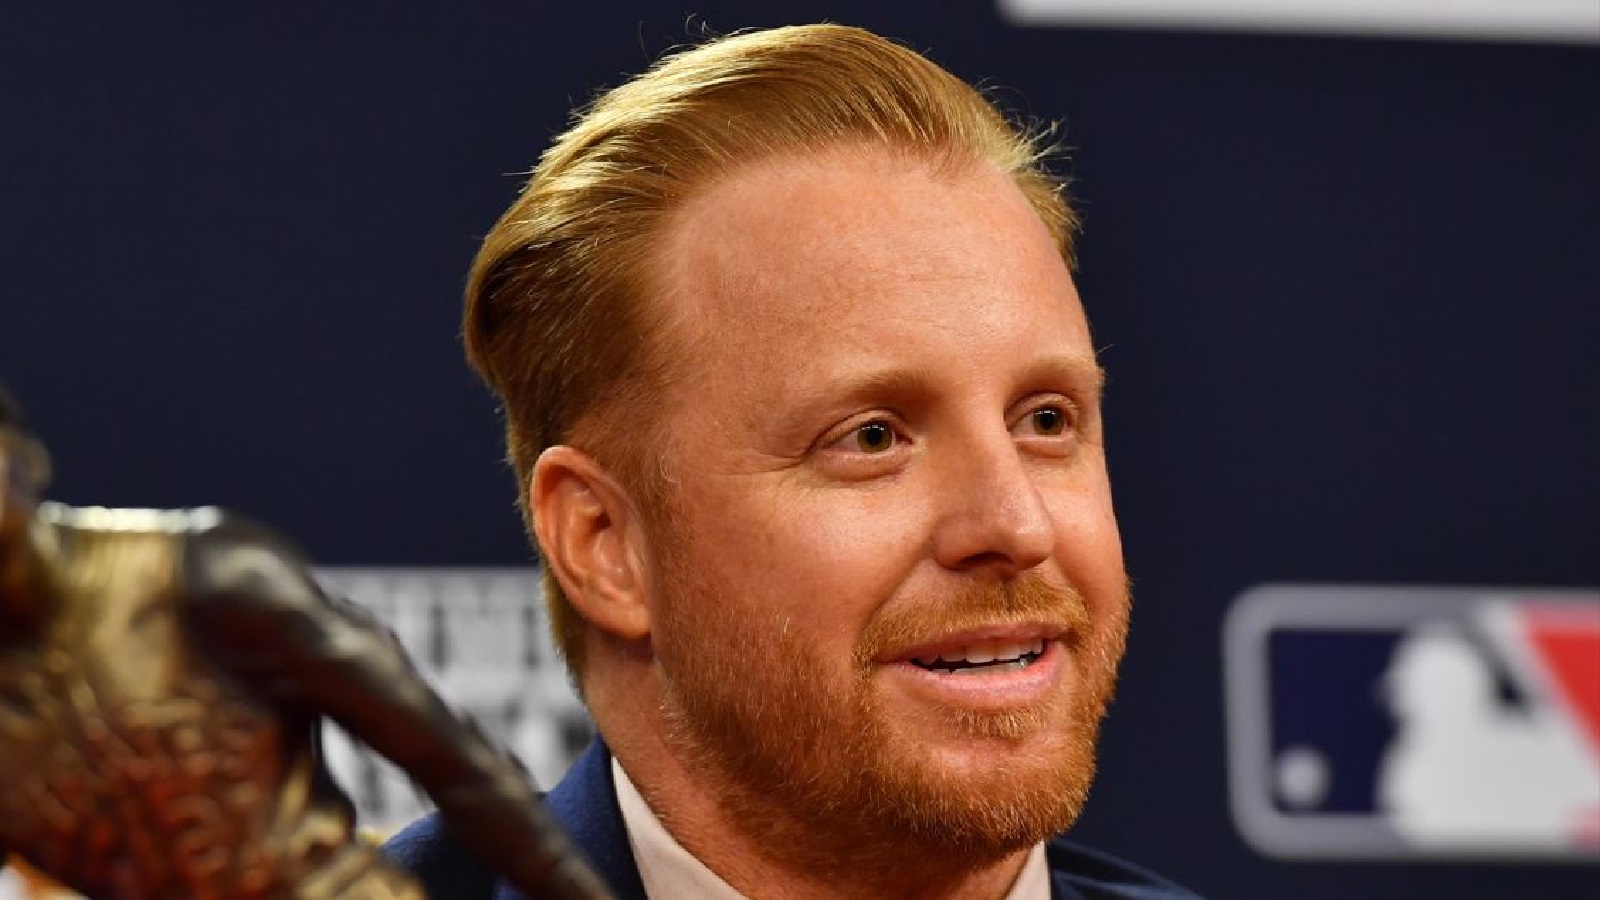 Red Sox's Justin Turner receives 16 stitches after getting hit by